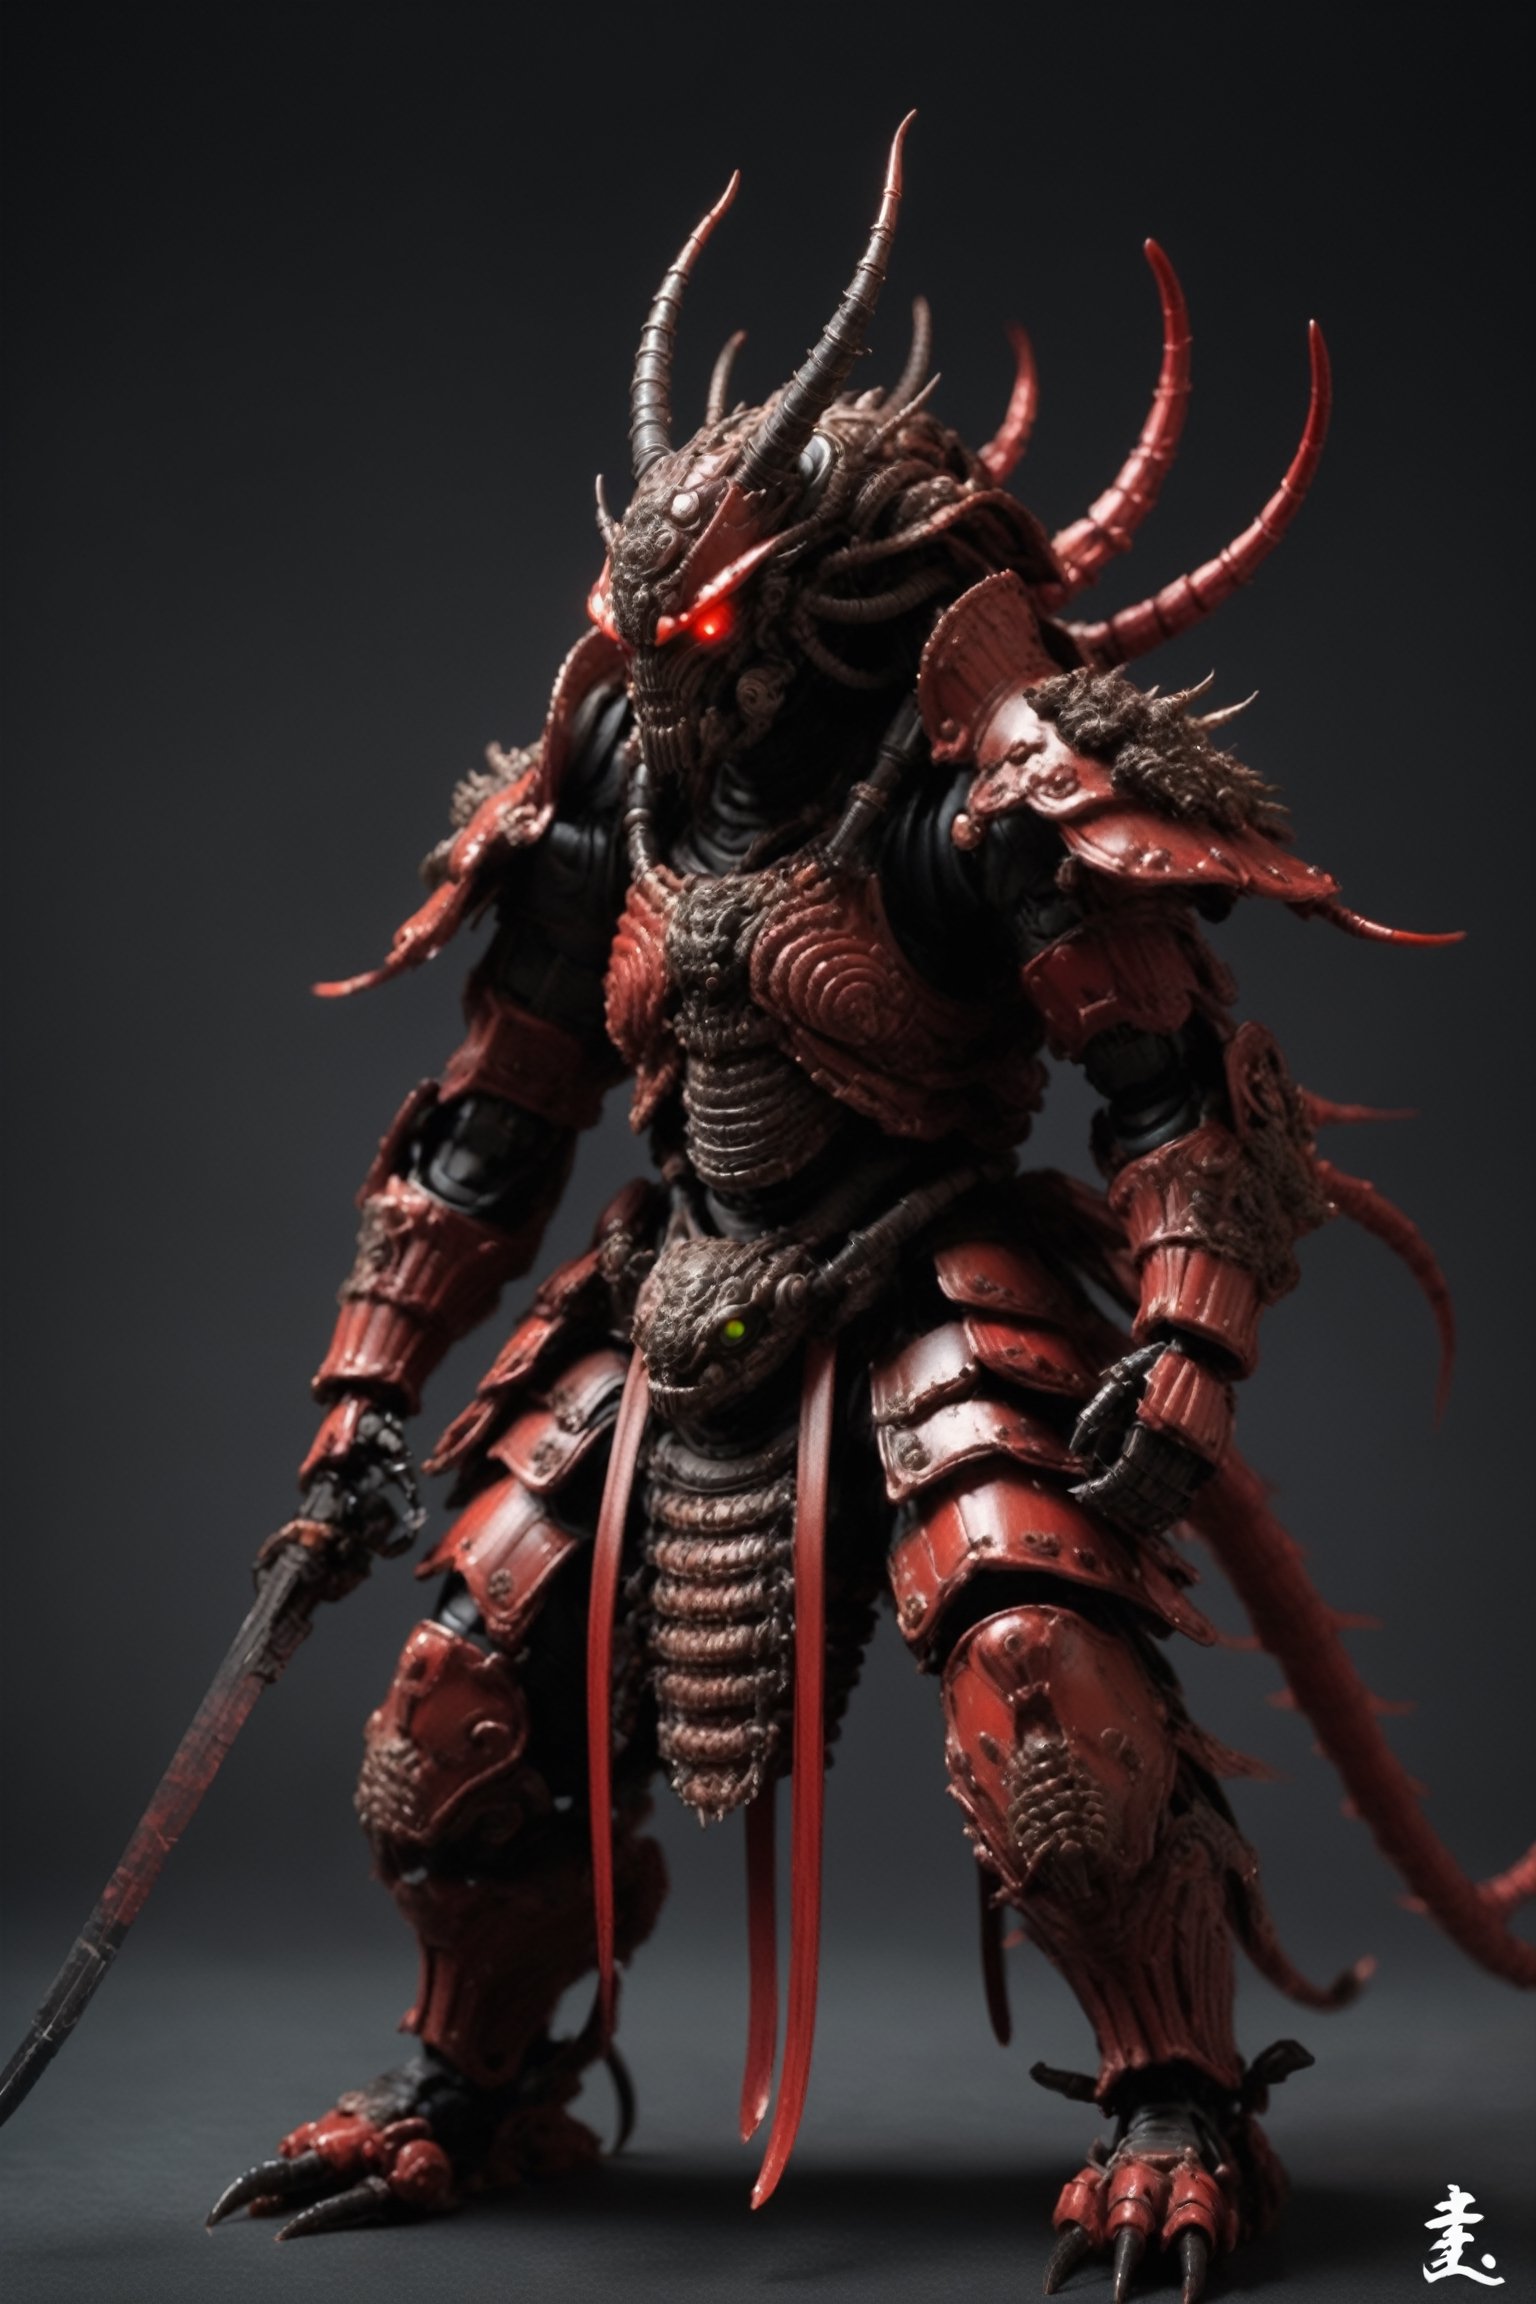  centipede Samurai,armor based on a giant centipede, red in color and armed with smooth, angular plates made to resemble an insect's exoskeleton, with centipede antennae on their helmets and intricate designs on their masks that resemble insect eyes,warrior,ROBOT,action figure